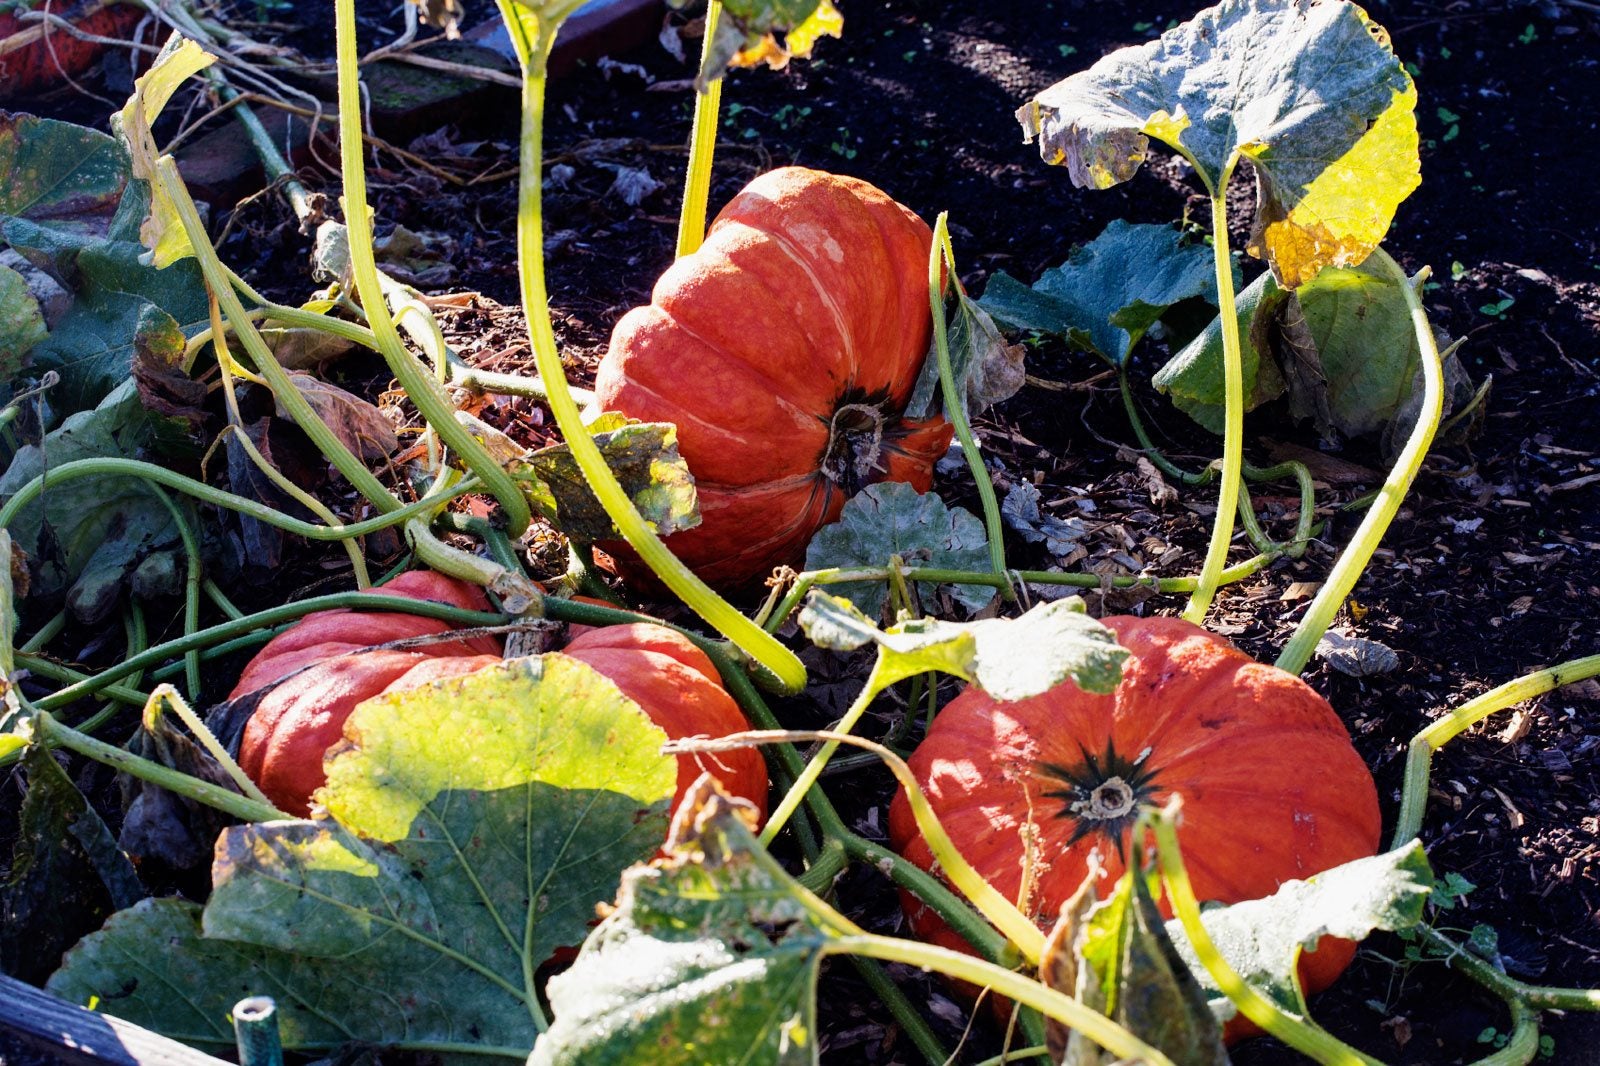 Before it gets cold, let's clean up my vegetable garden. The season ma